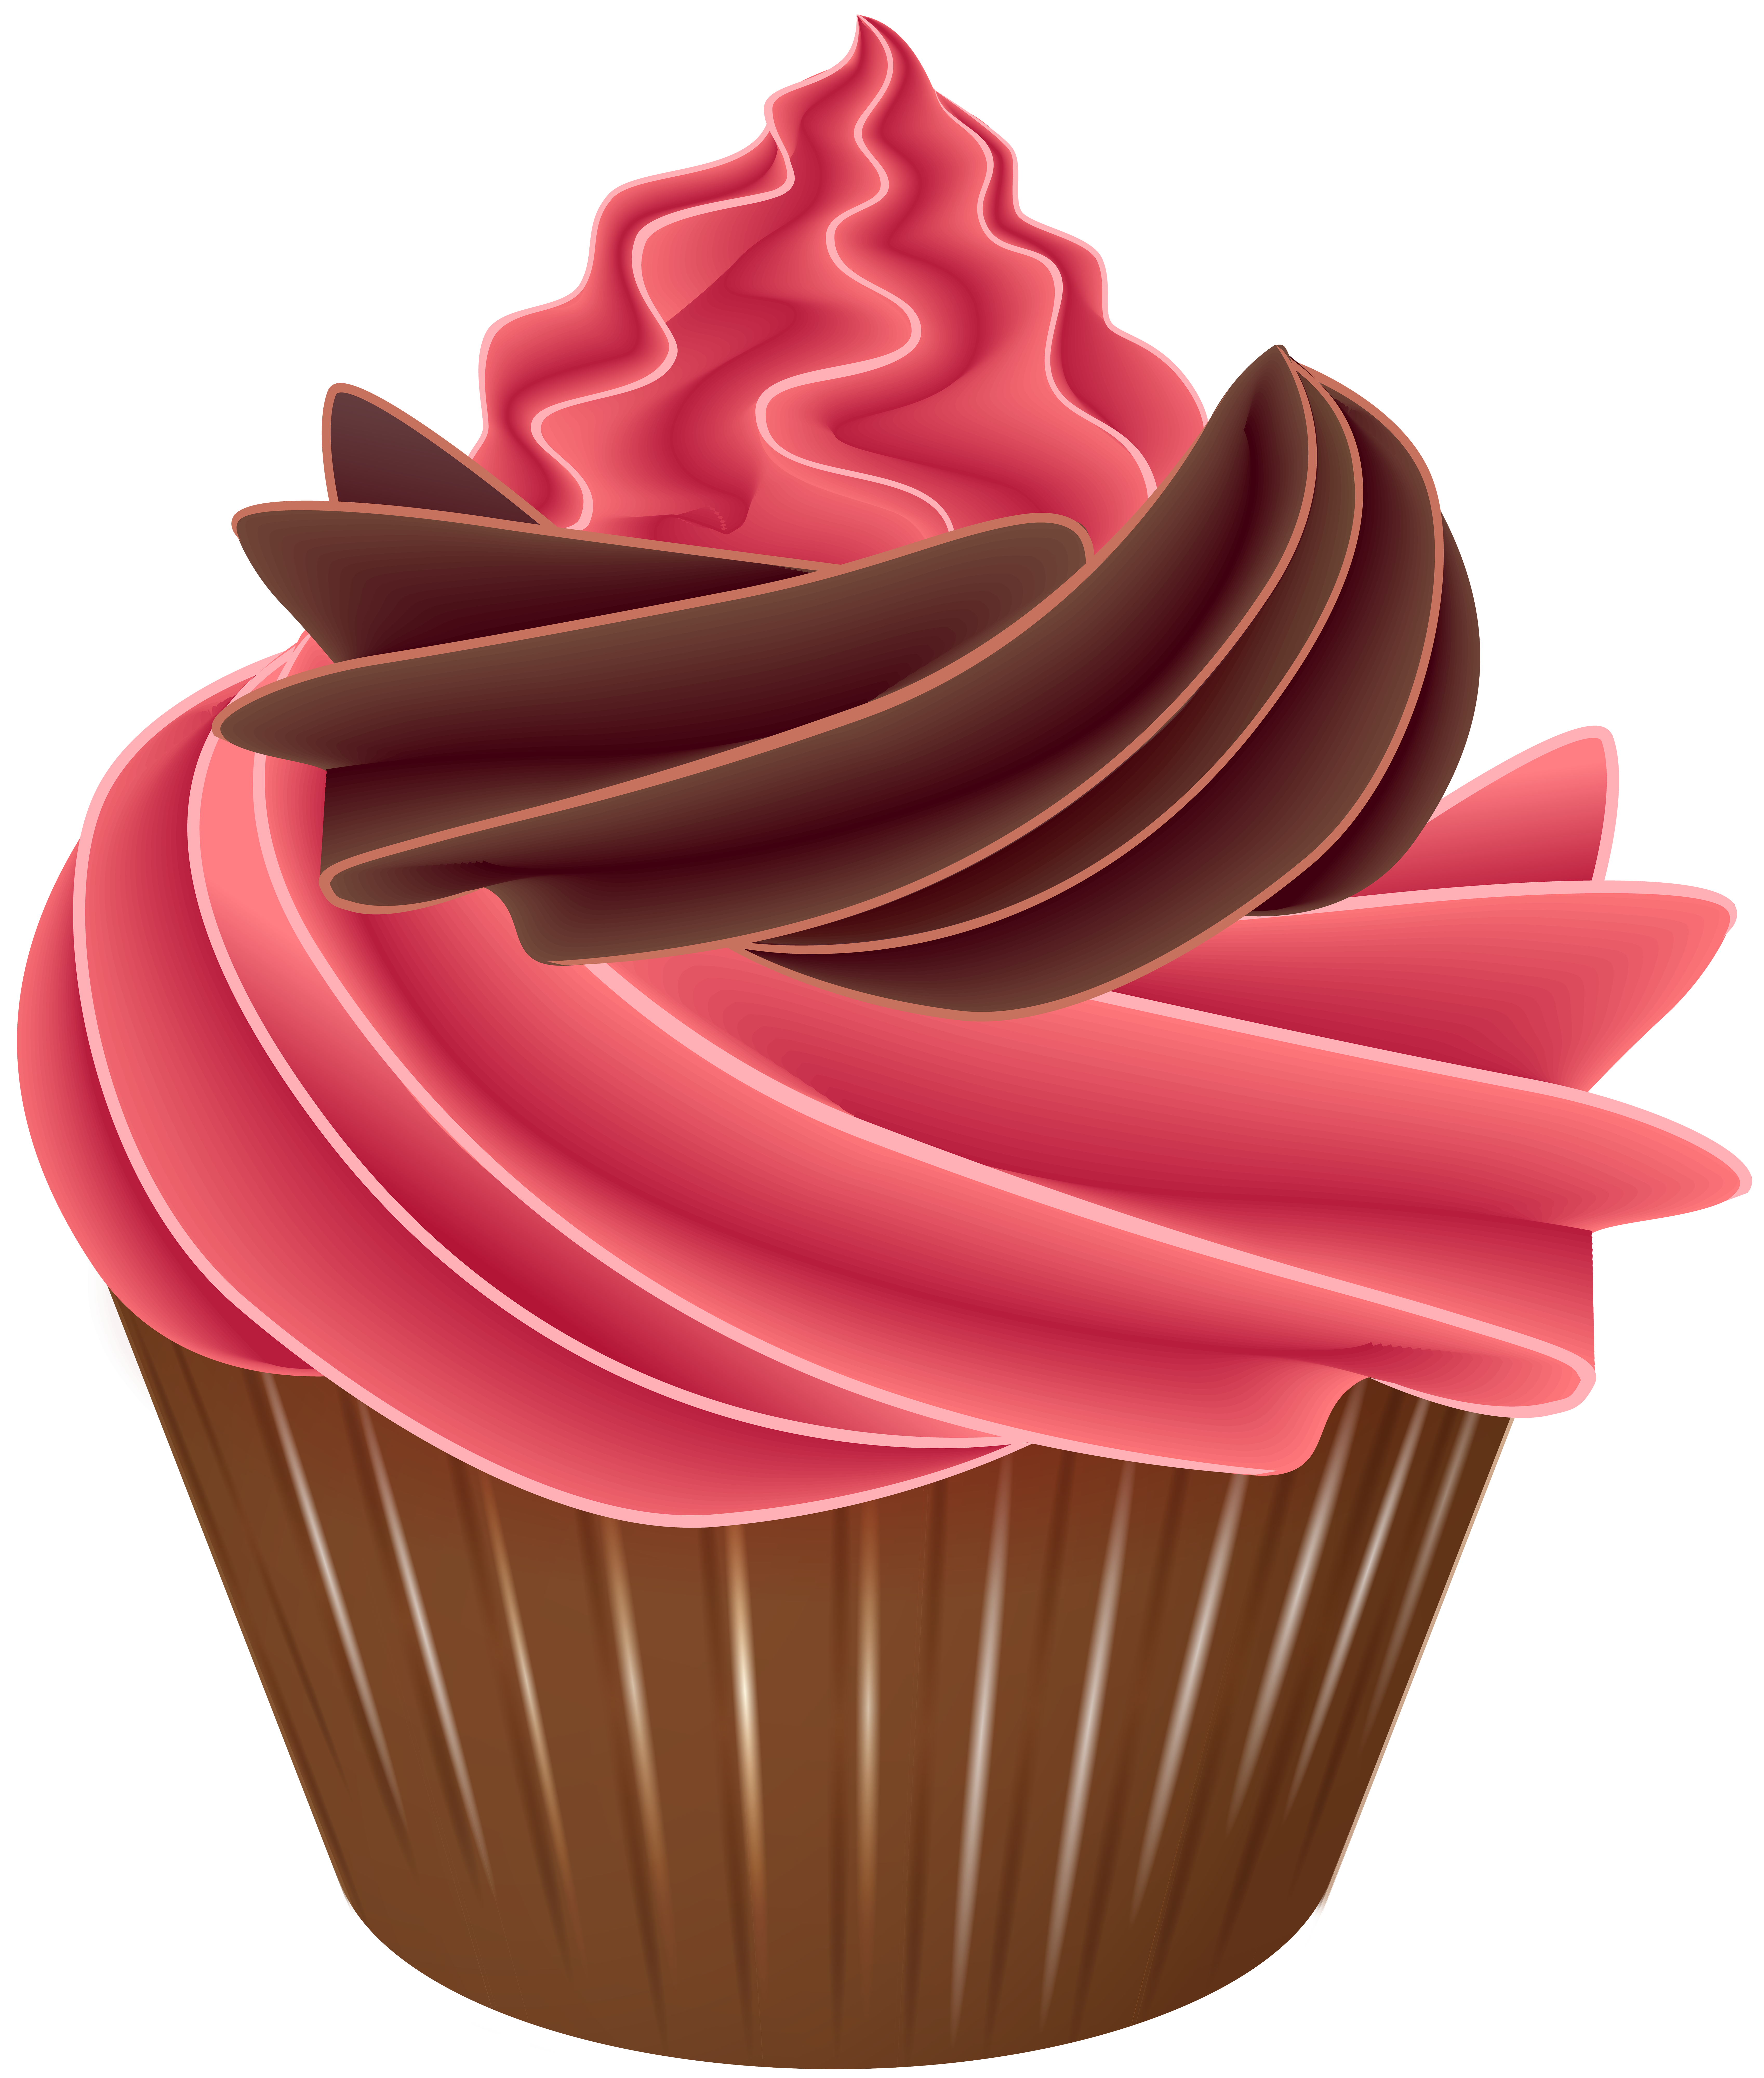 Clipart halloween cup cake. Cupcake png clip art